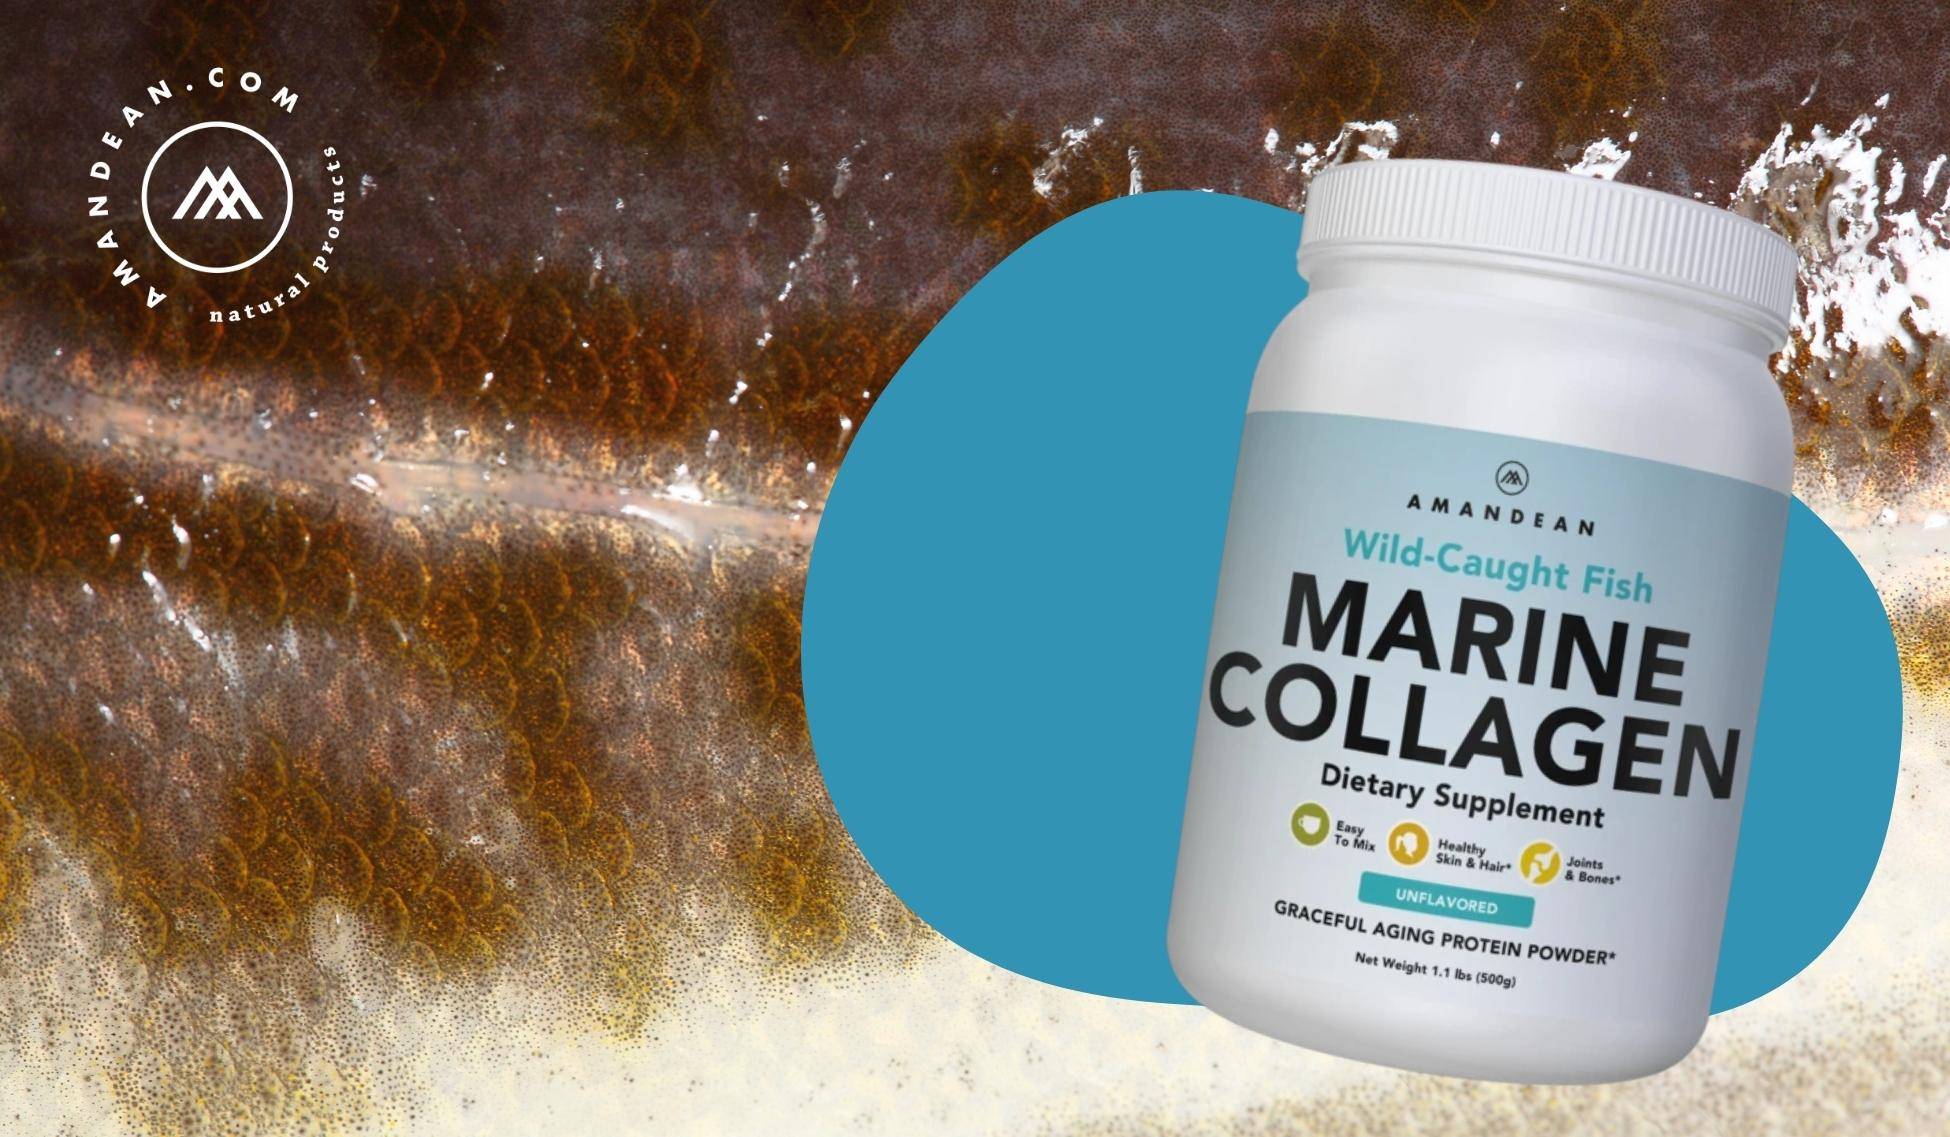 Does Marine Collagen Come From Fish Scales or Skin?